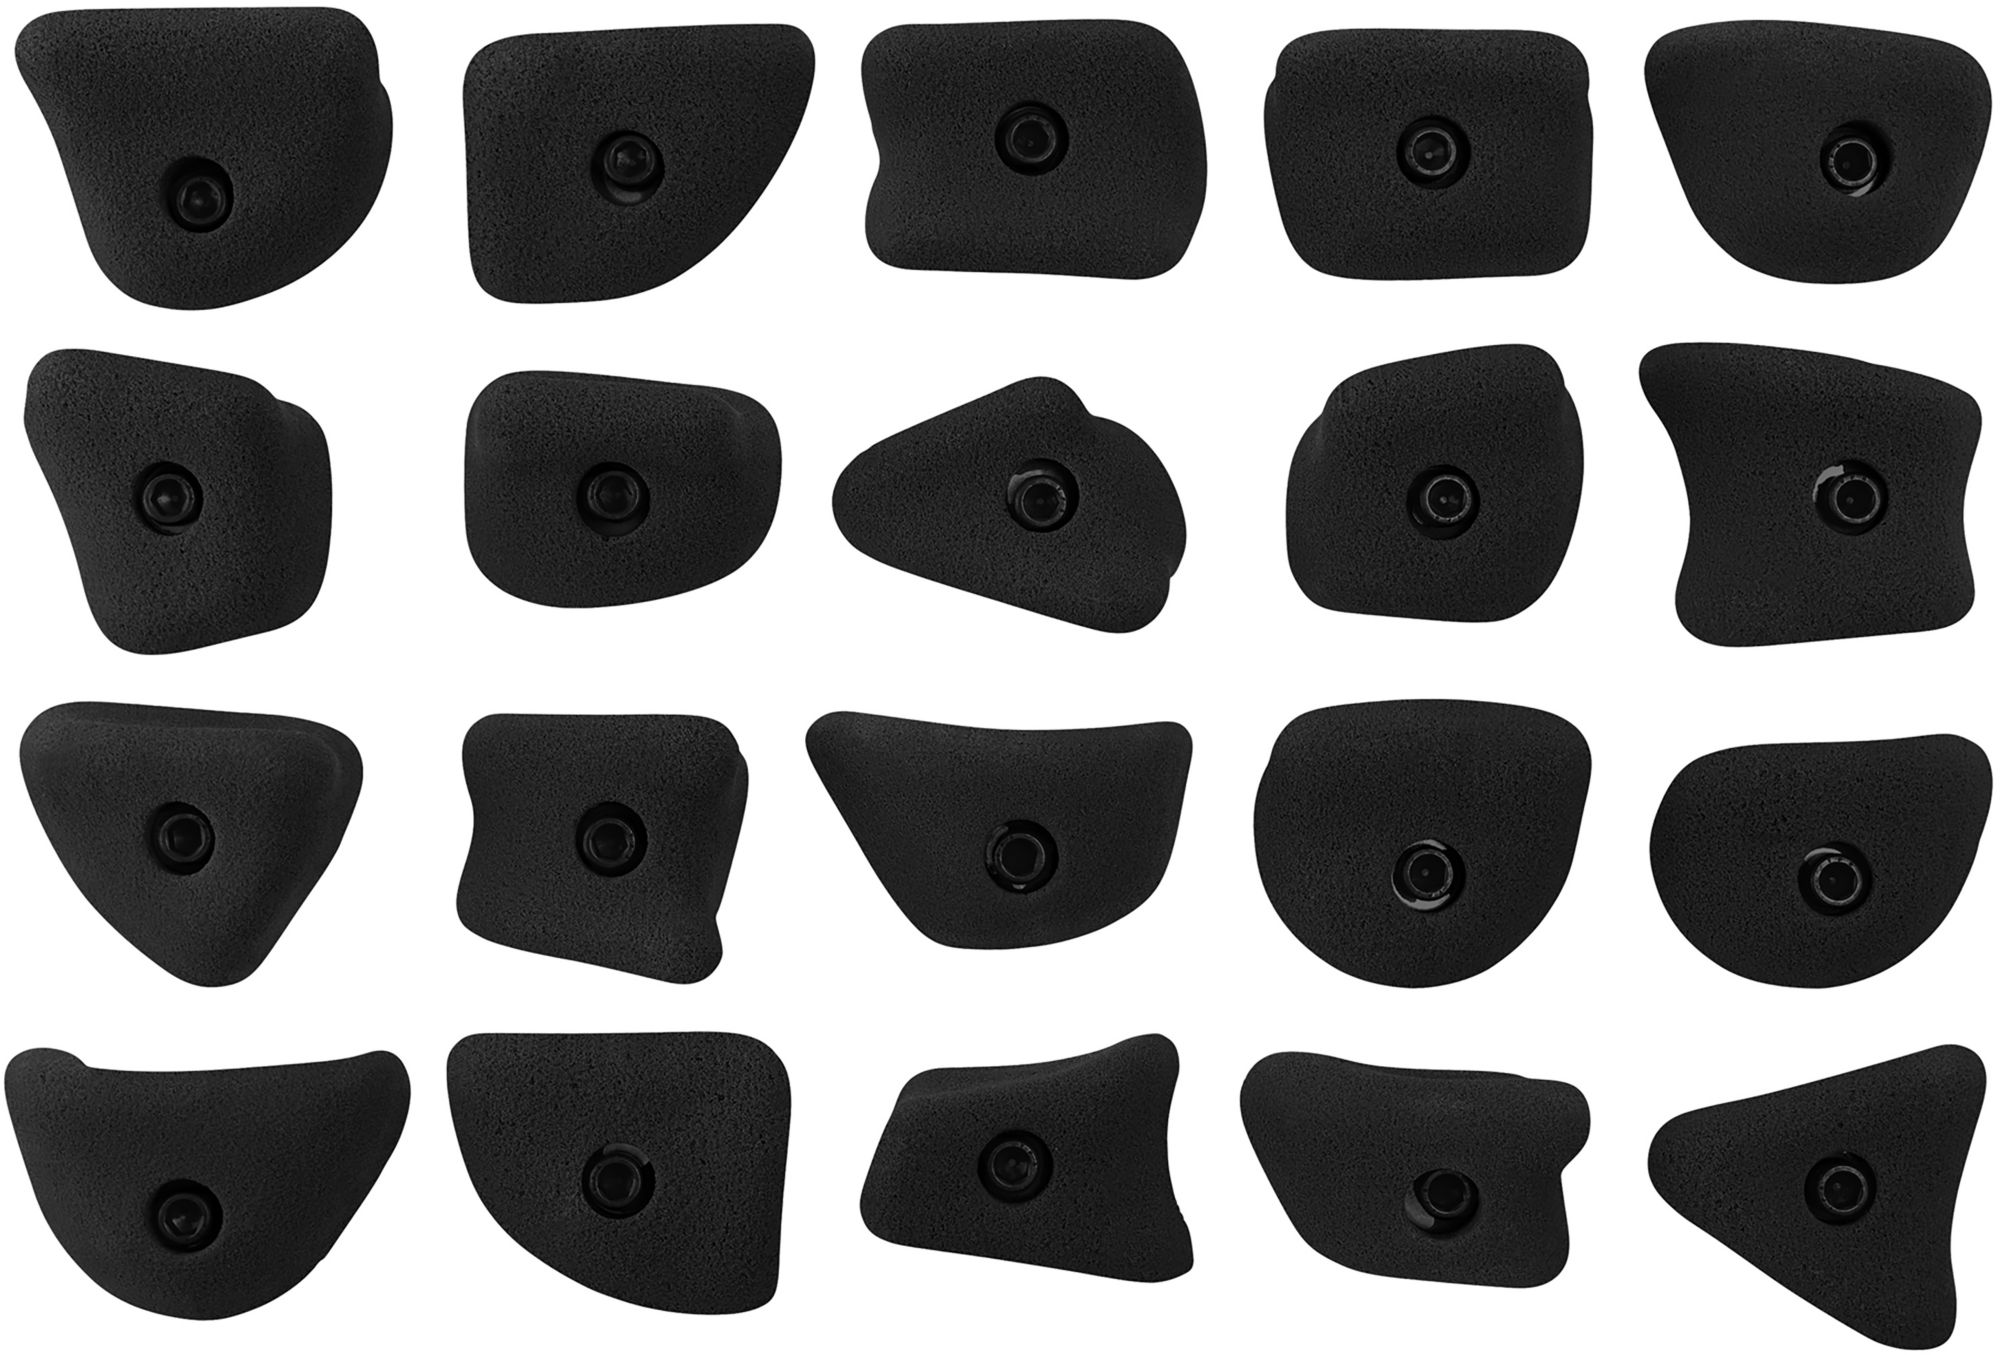 Photos - Outdoor Furniture So iLL Smooth Small 20 Piece Hold Kit, Black 22KYEUSMTHSMLL20HCAC